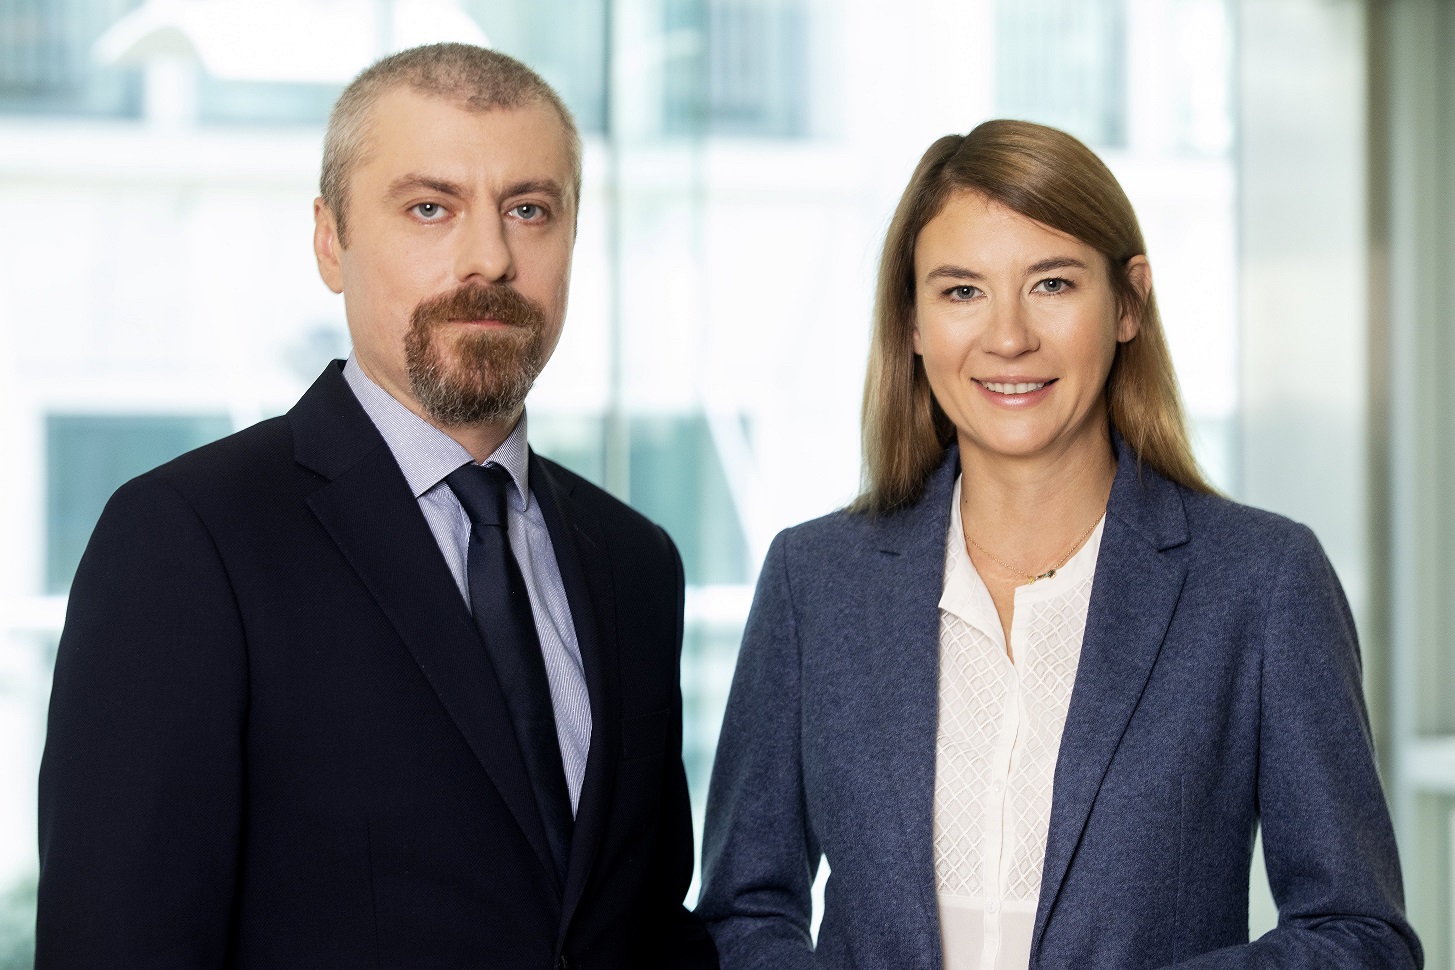 Mazars in Poland appoints new Partners